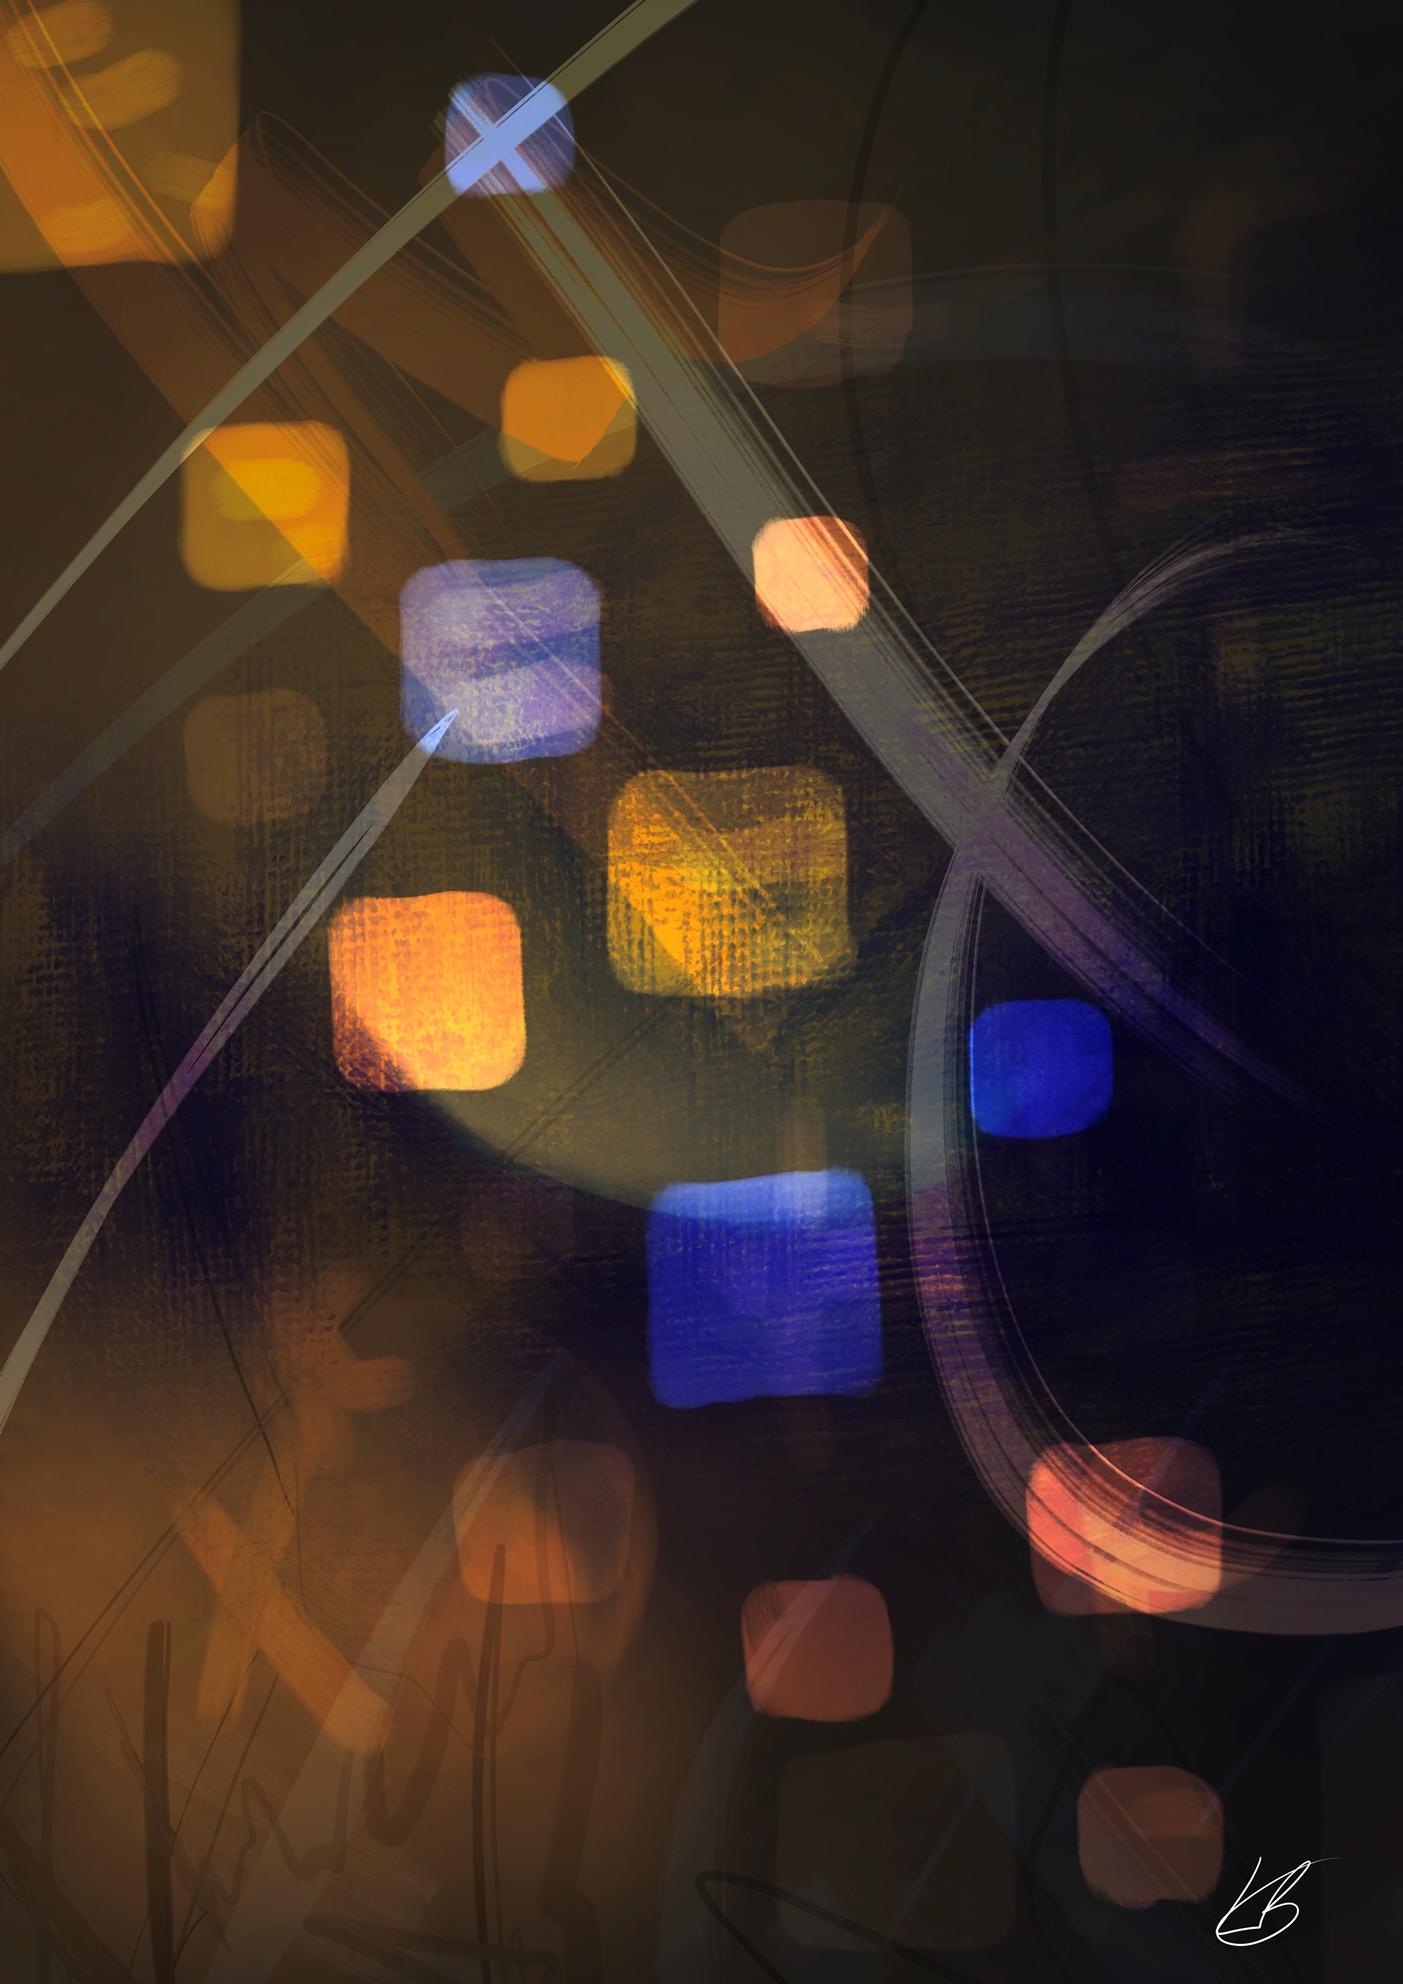 An abstract digital painting by Lily Bourne titled Abstract 2.0. Coloured with a series of shapes and stroke in blue and yellow on a brown background.